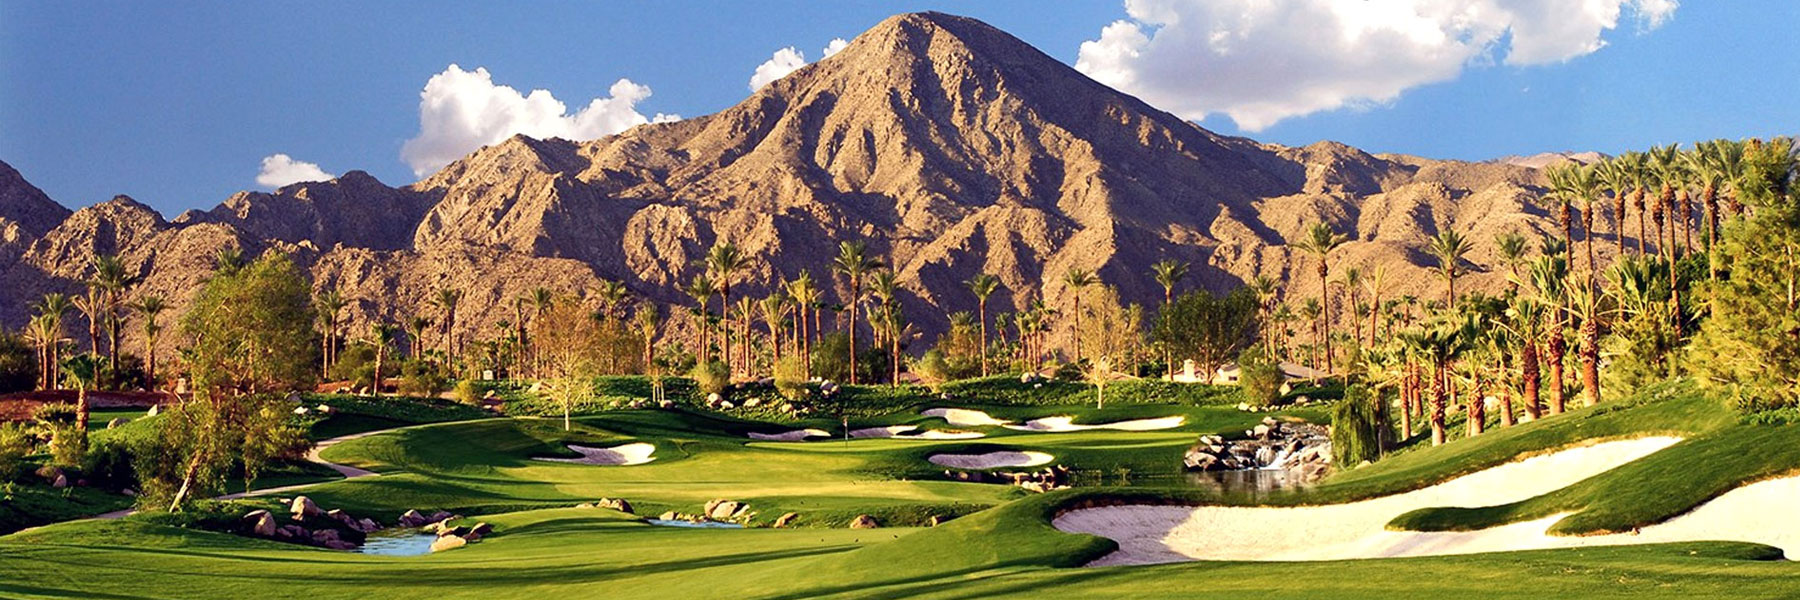 California Golf Vacation Packages